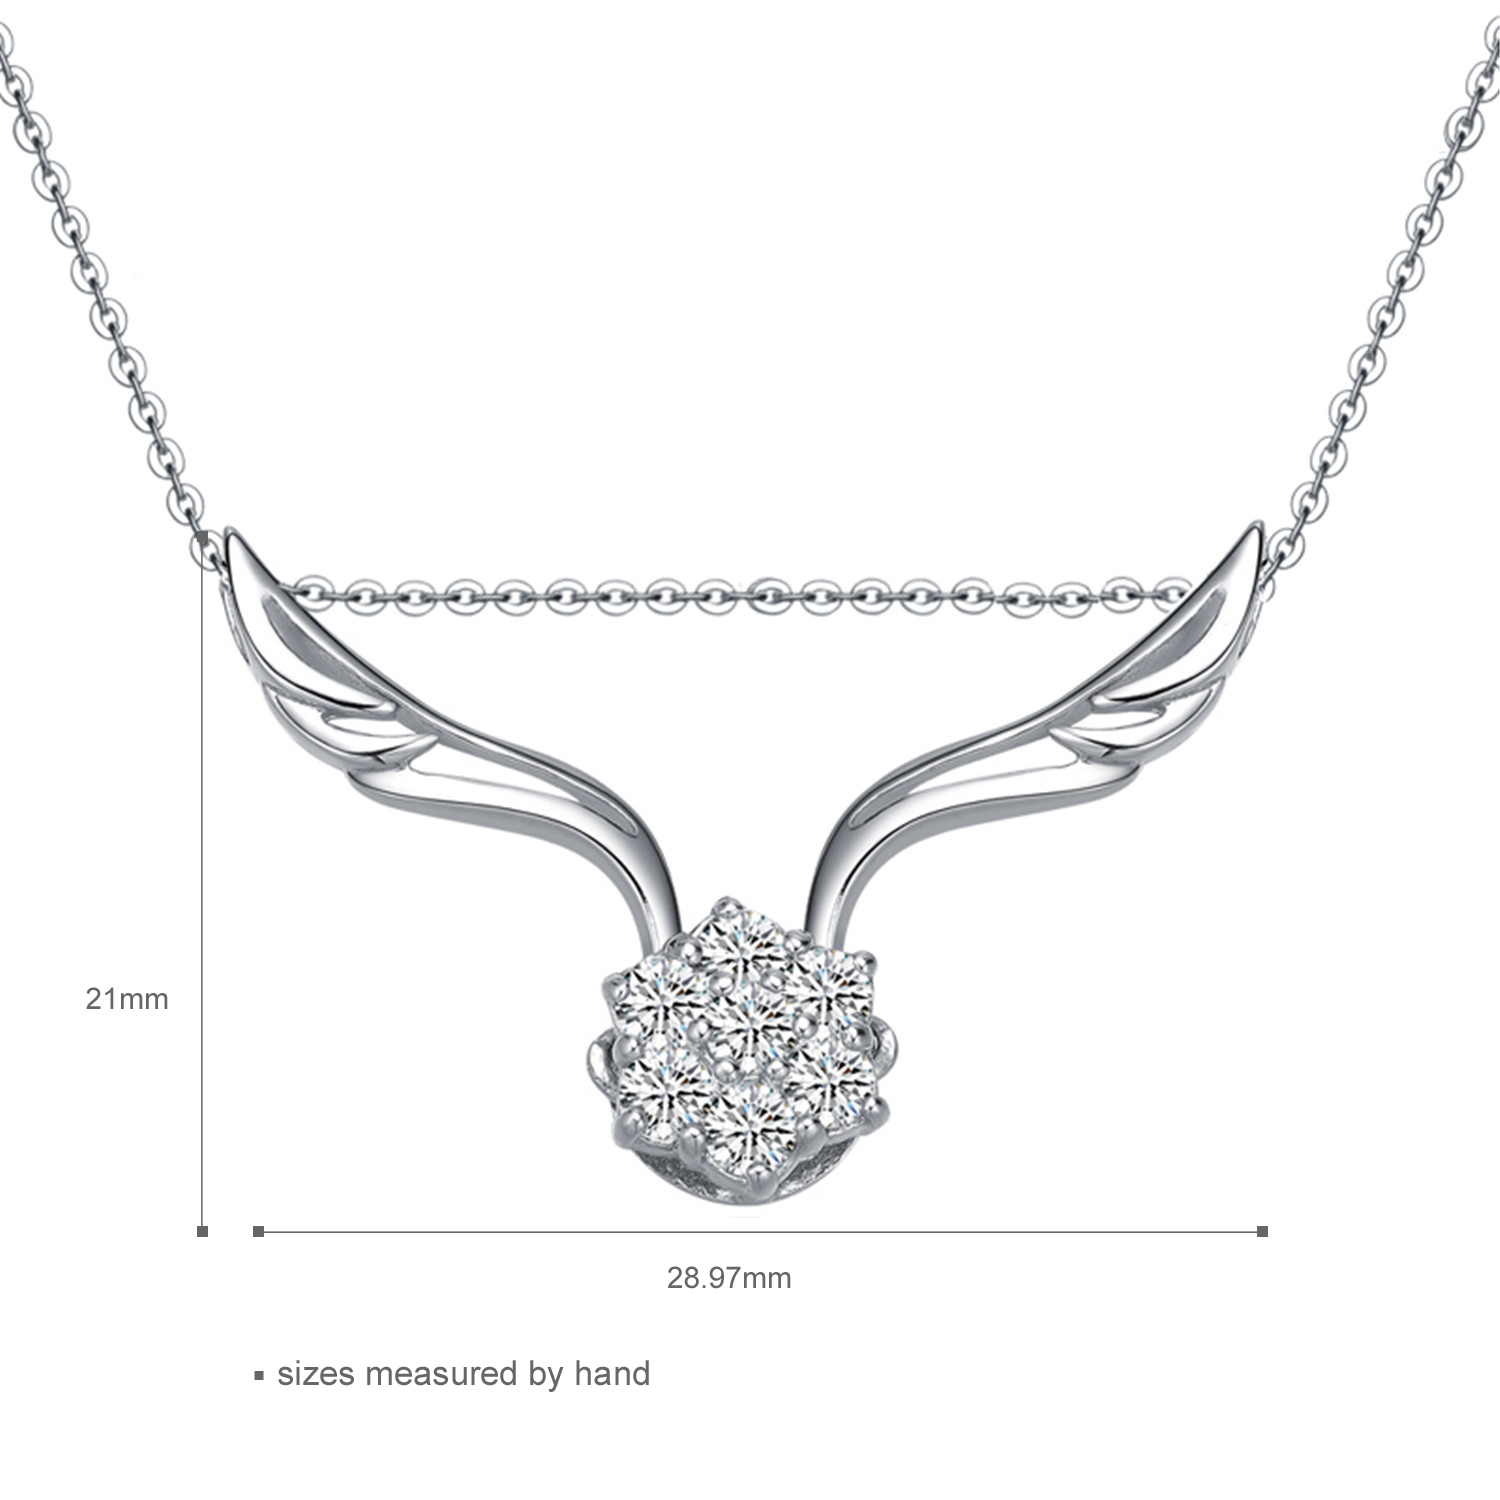  Nickel-Free Lead-Free jewelry 925 Sterling Silver cross chain Cubic Zirconia Wing Pendant Necklace(图6)